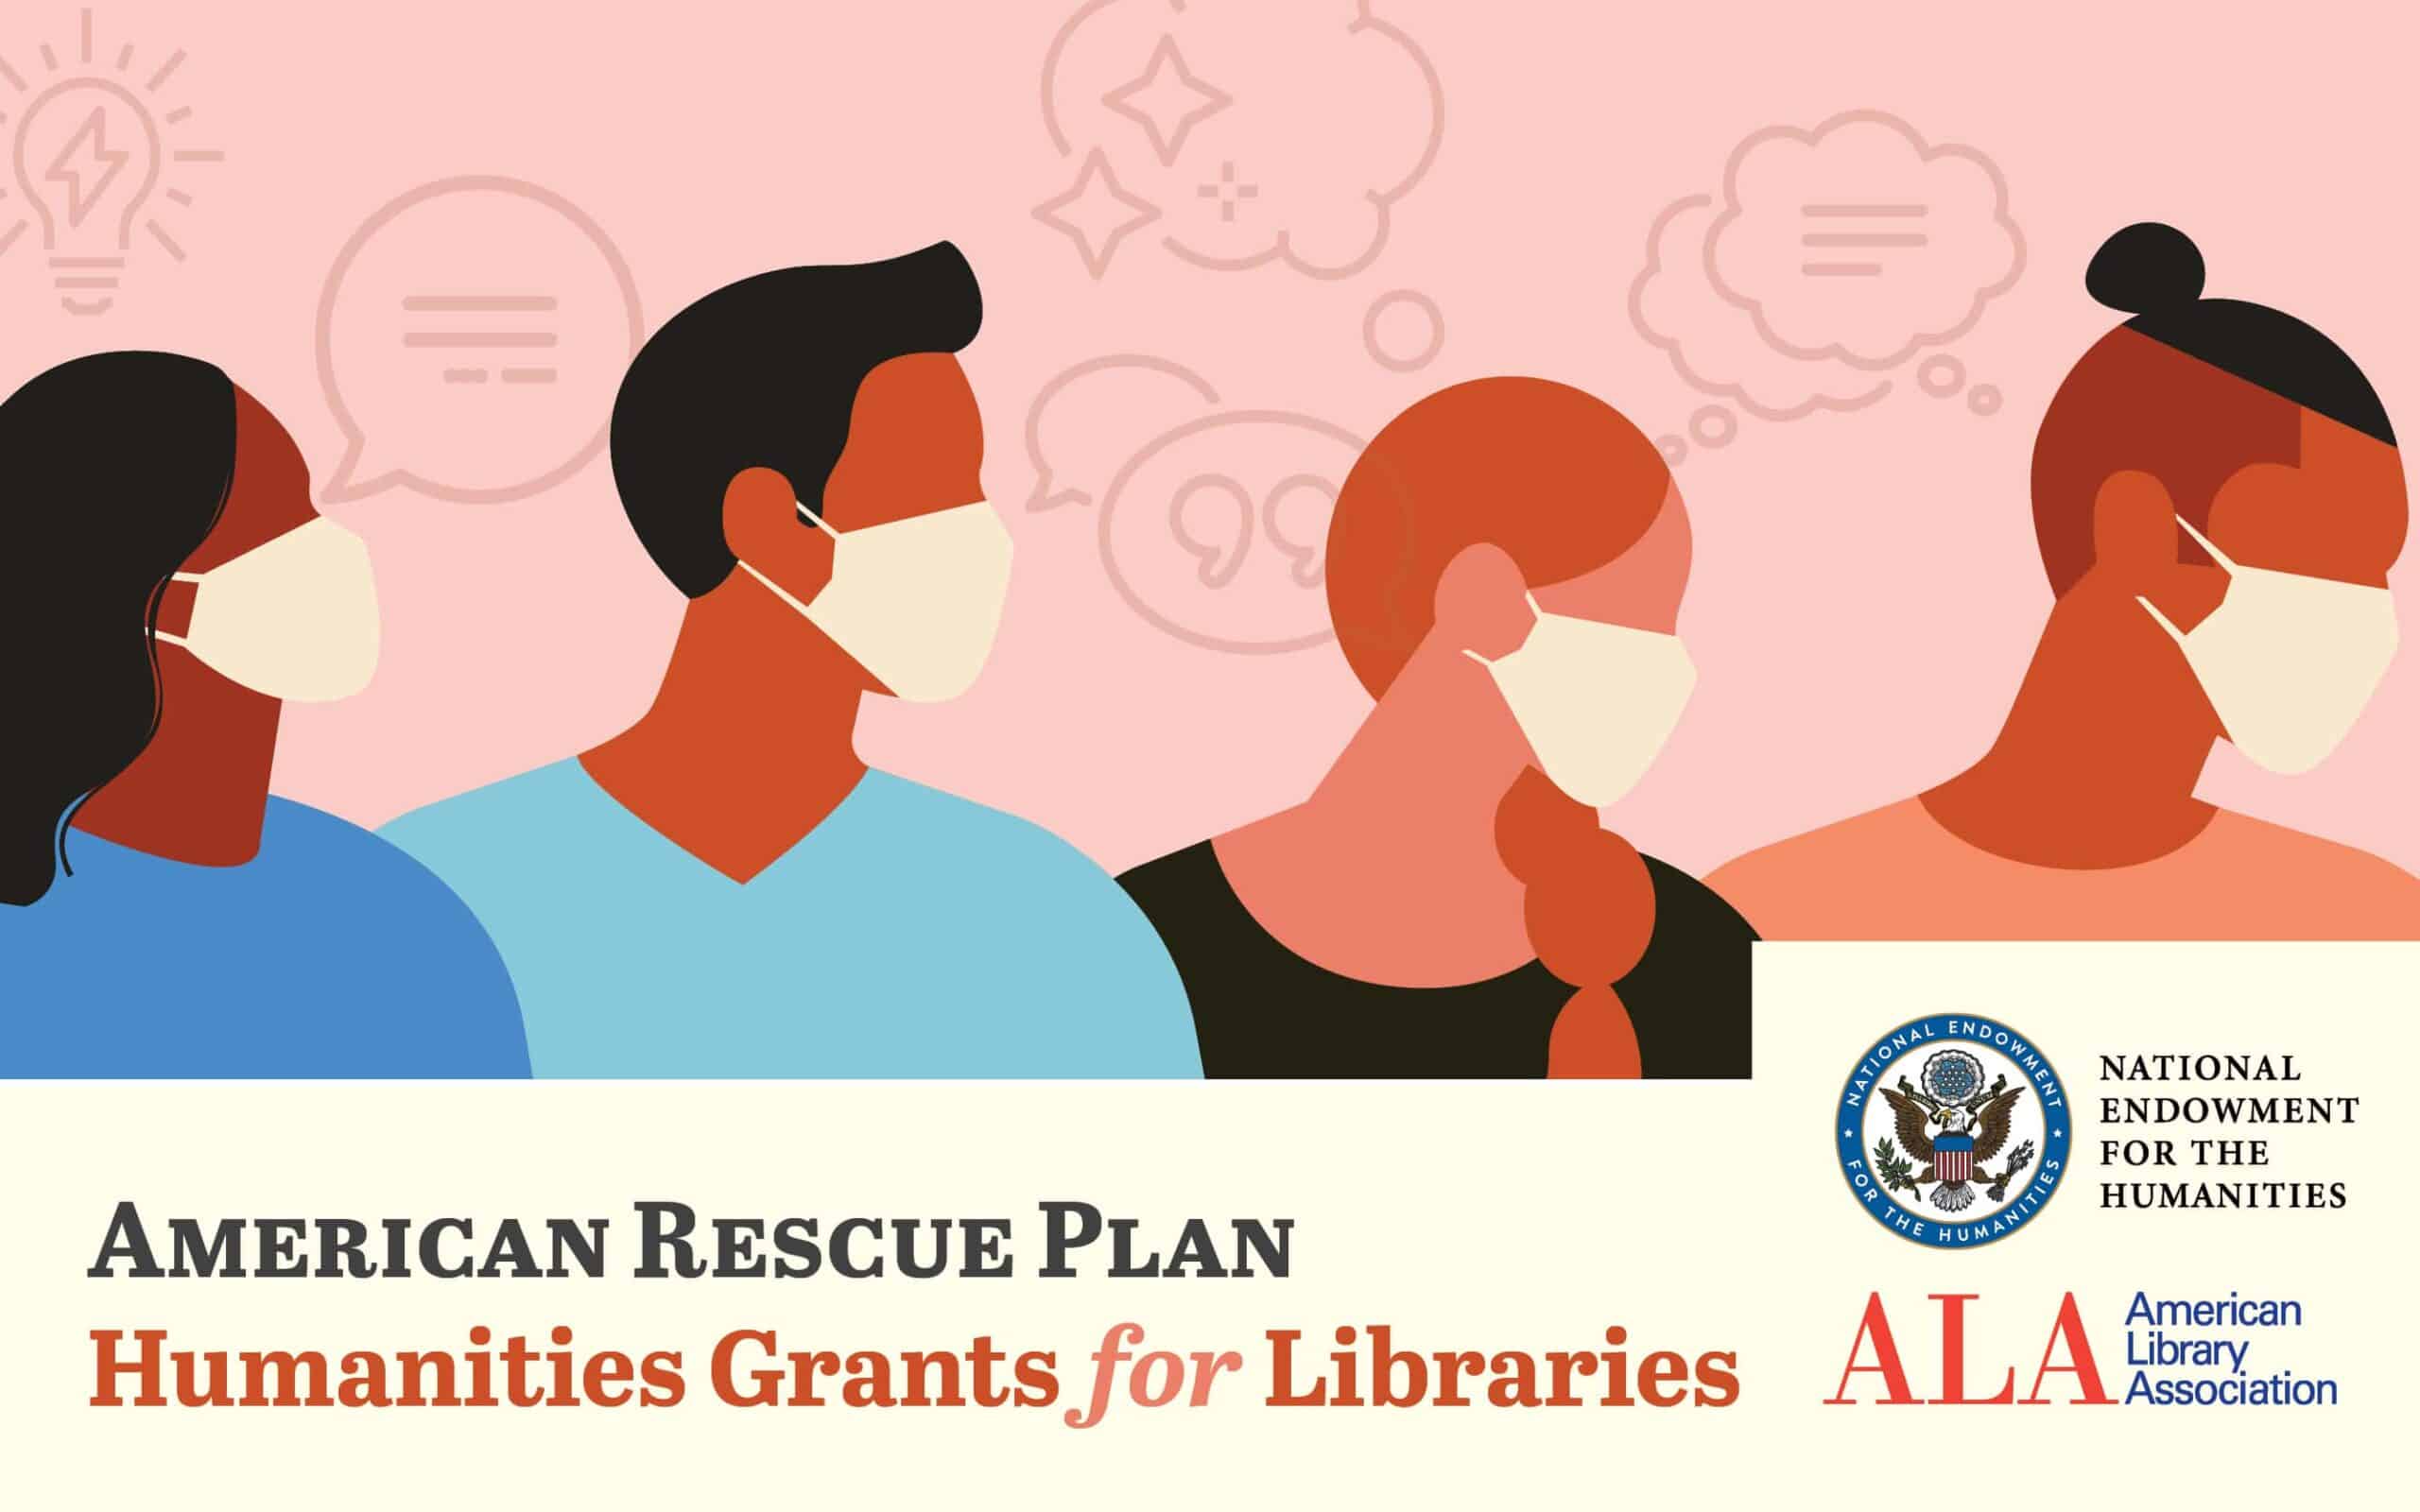 American Rescue Plan Humanities Grants for Libraries